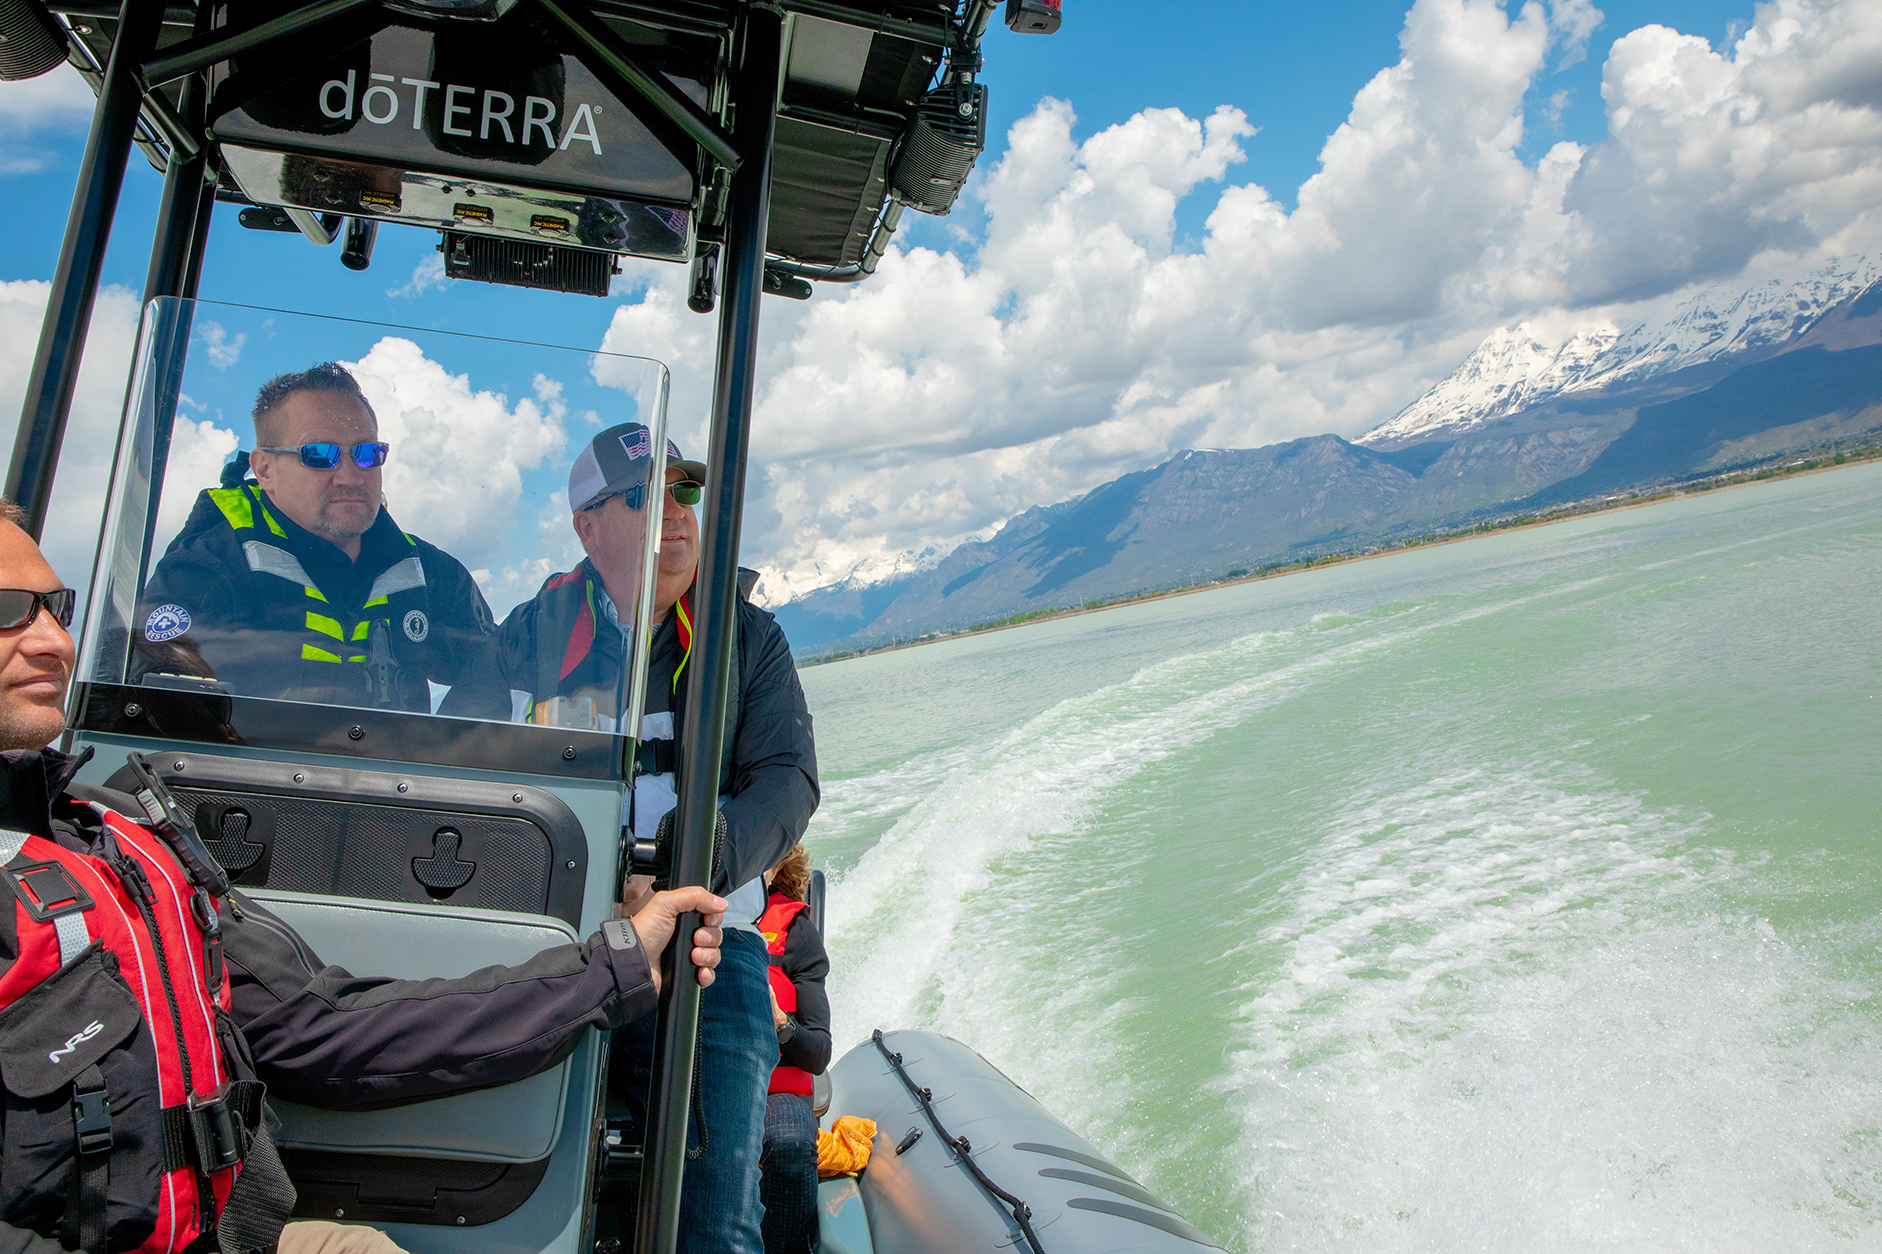 Utah County Search and Rescue dōTERRA Boat